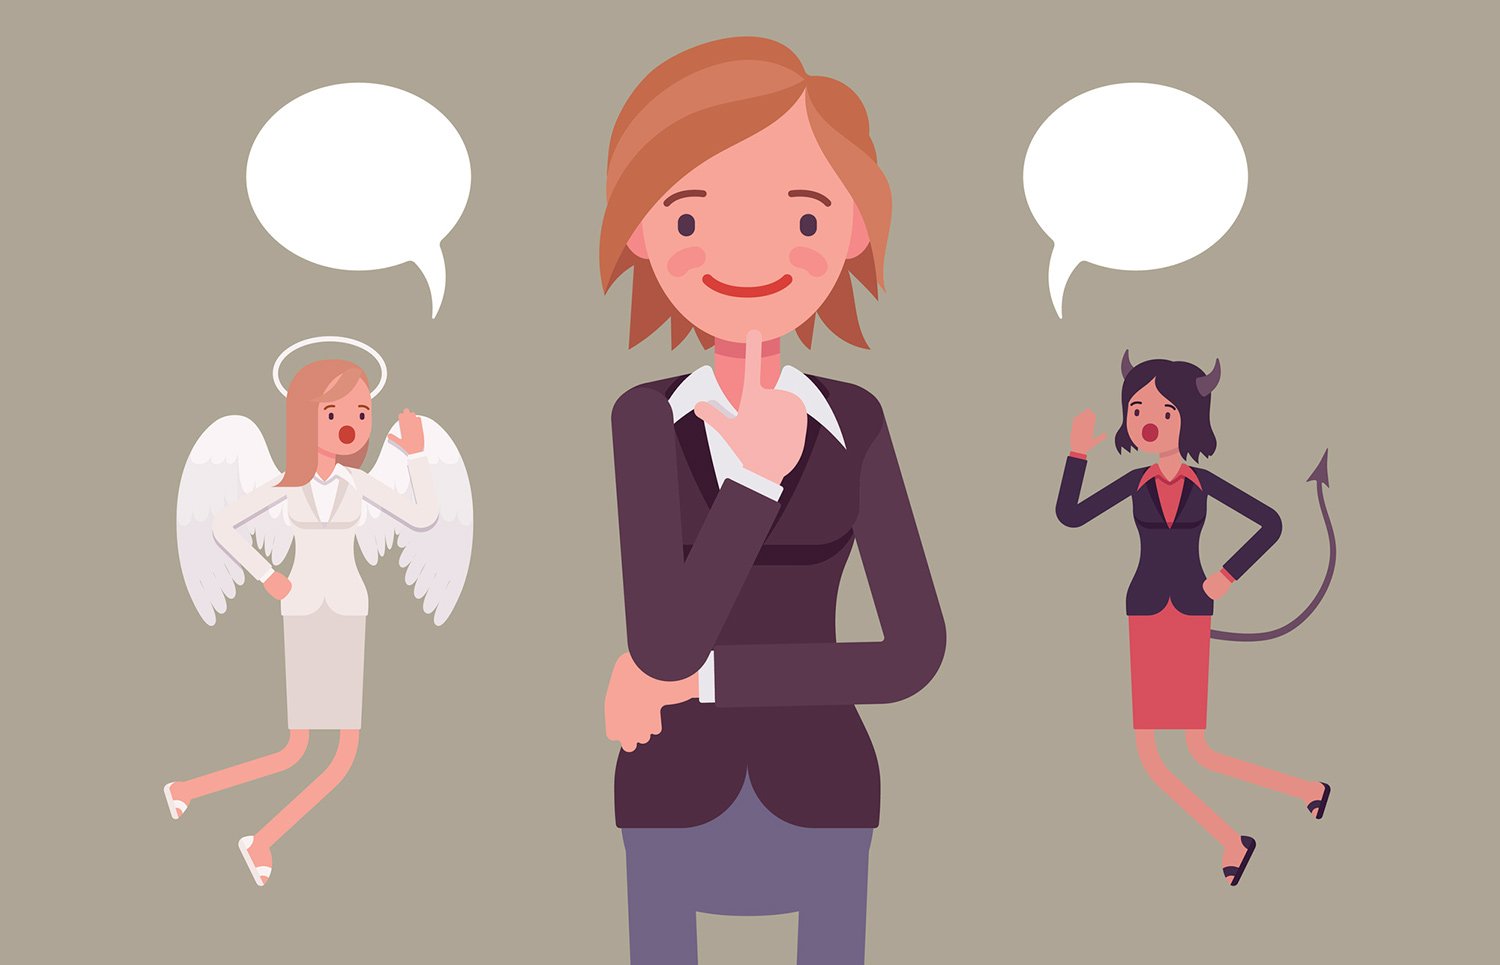 Vector image of a businesswoman making a decision with a devil on one side and an angel on the other